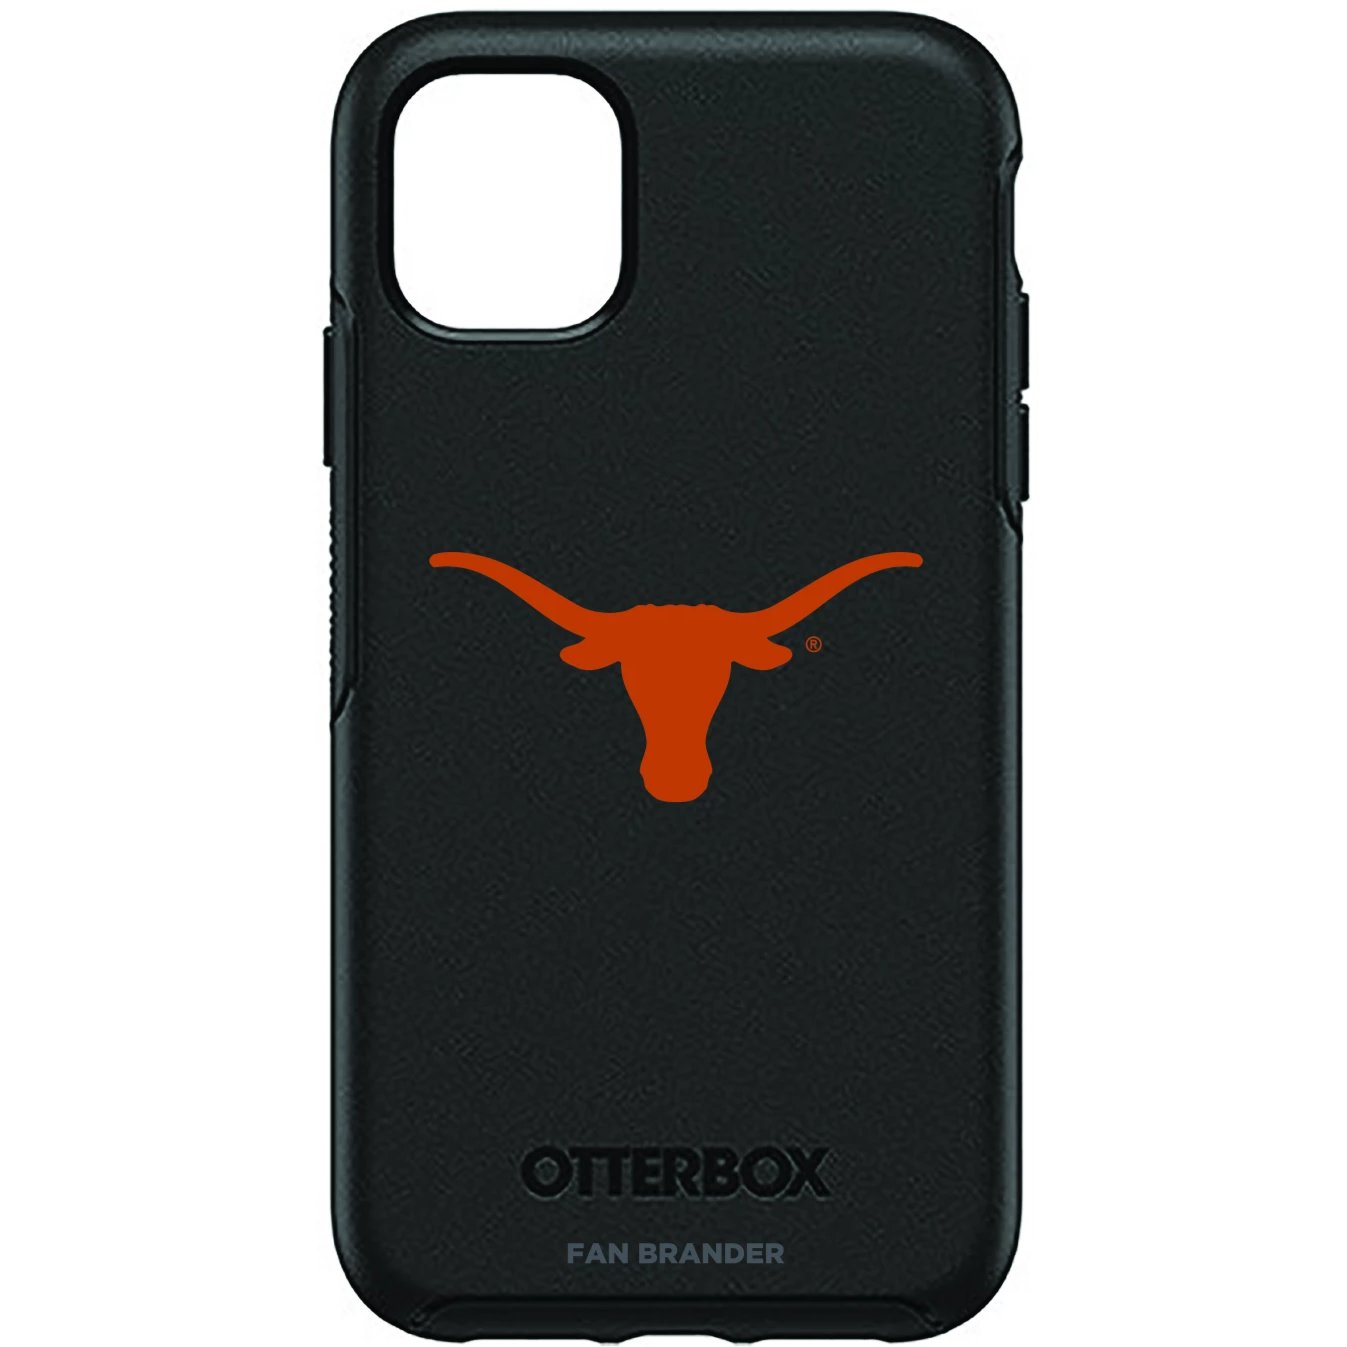 Texas Longhorns Otterbox Symmetry Case (for iPhone 11, Pro, Pro Max)